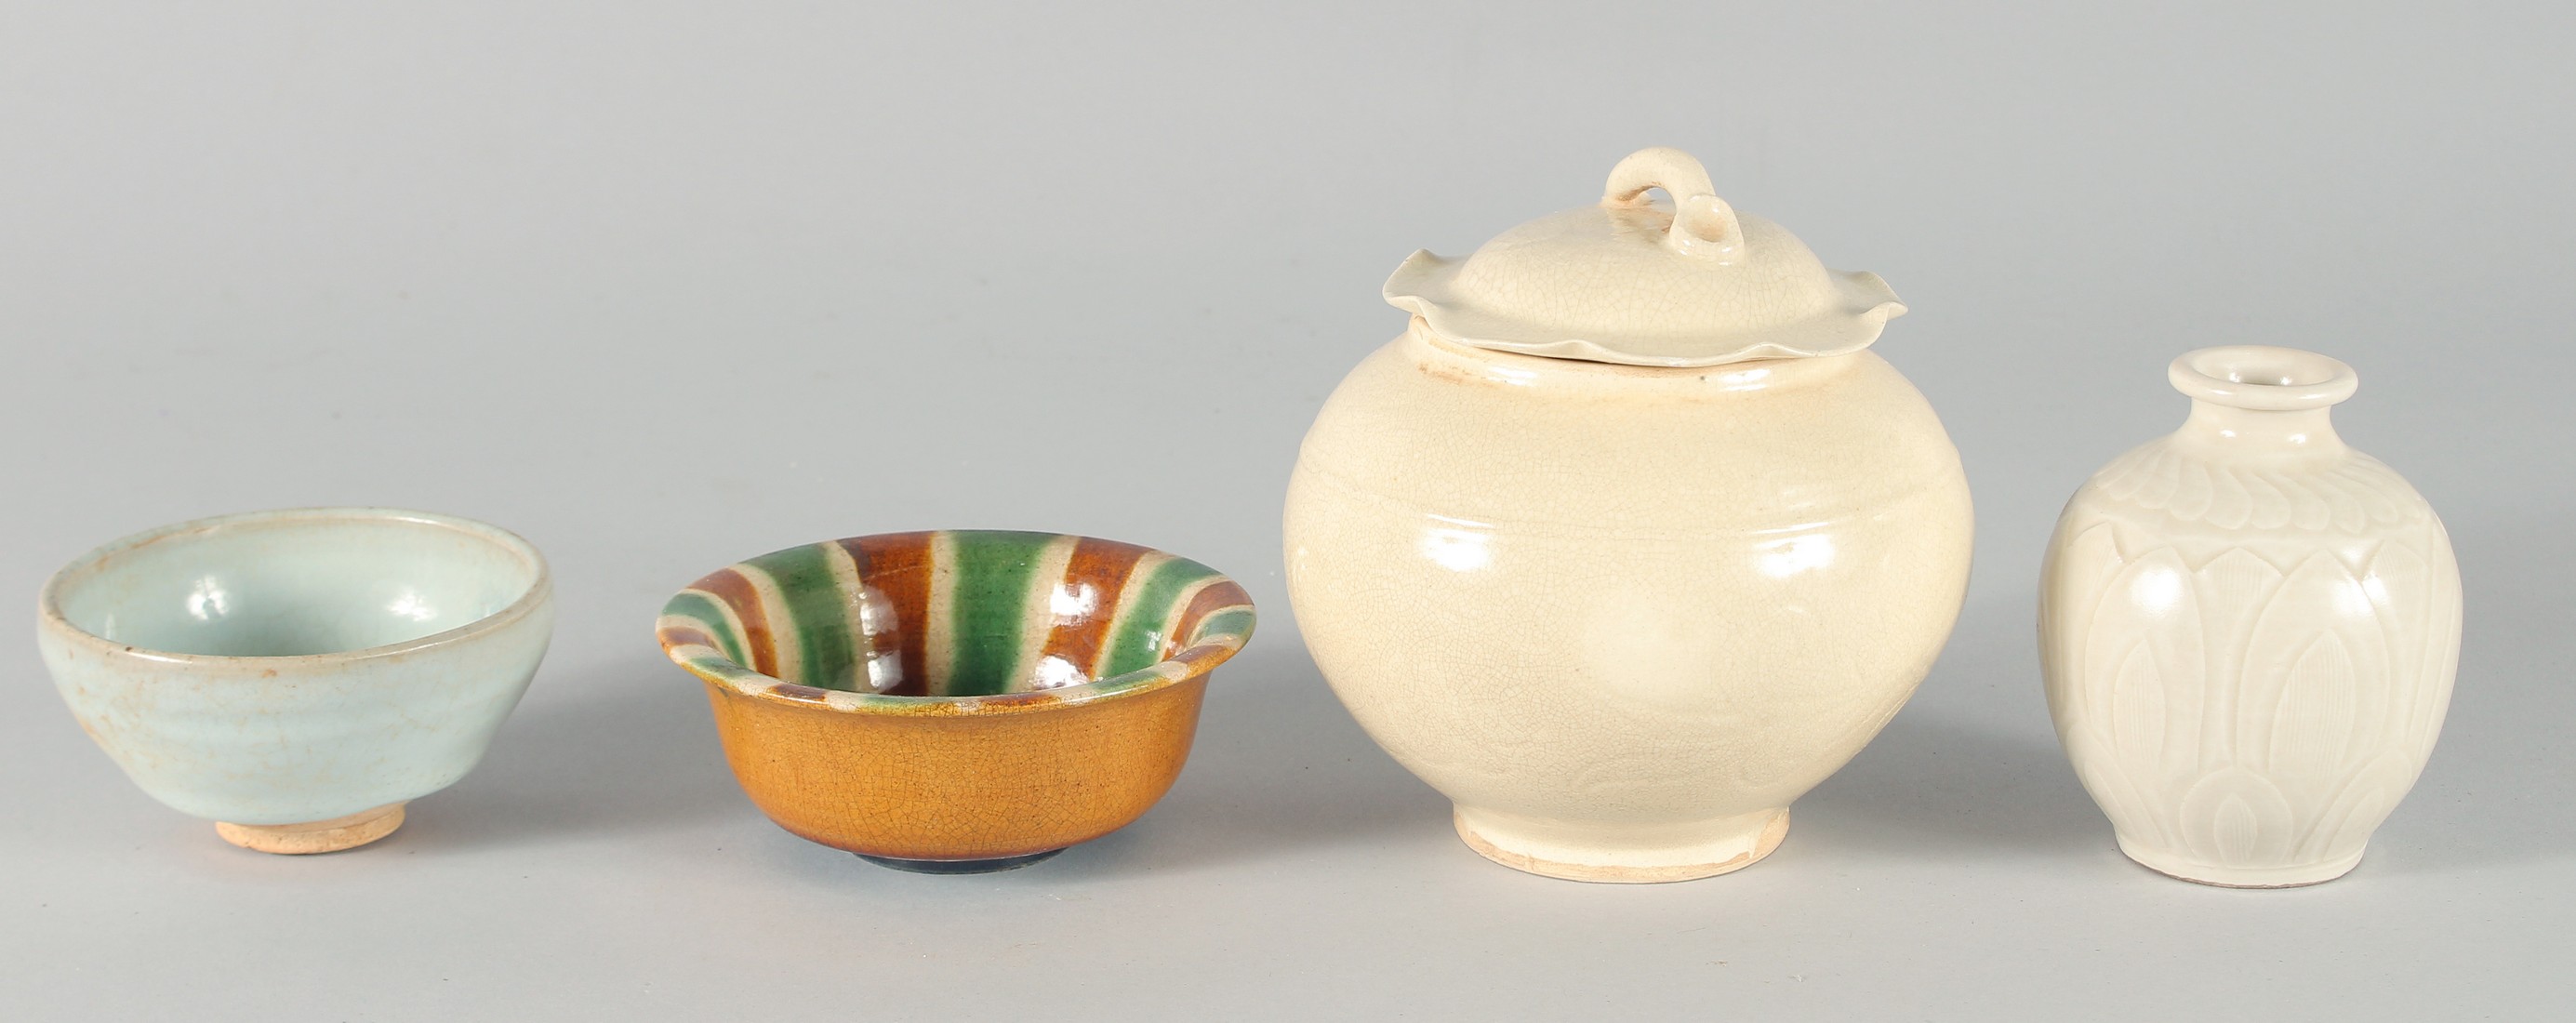 A COLLECTION OF FOUR CHINESE GLAZED POTTERY ITEMS, comprising a jar and cover, a small vase and